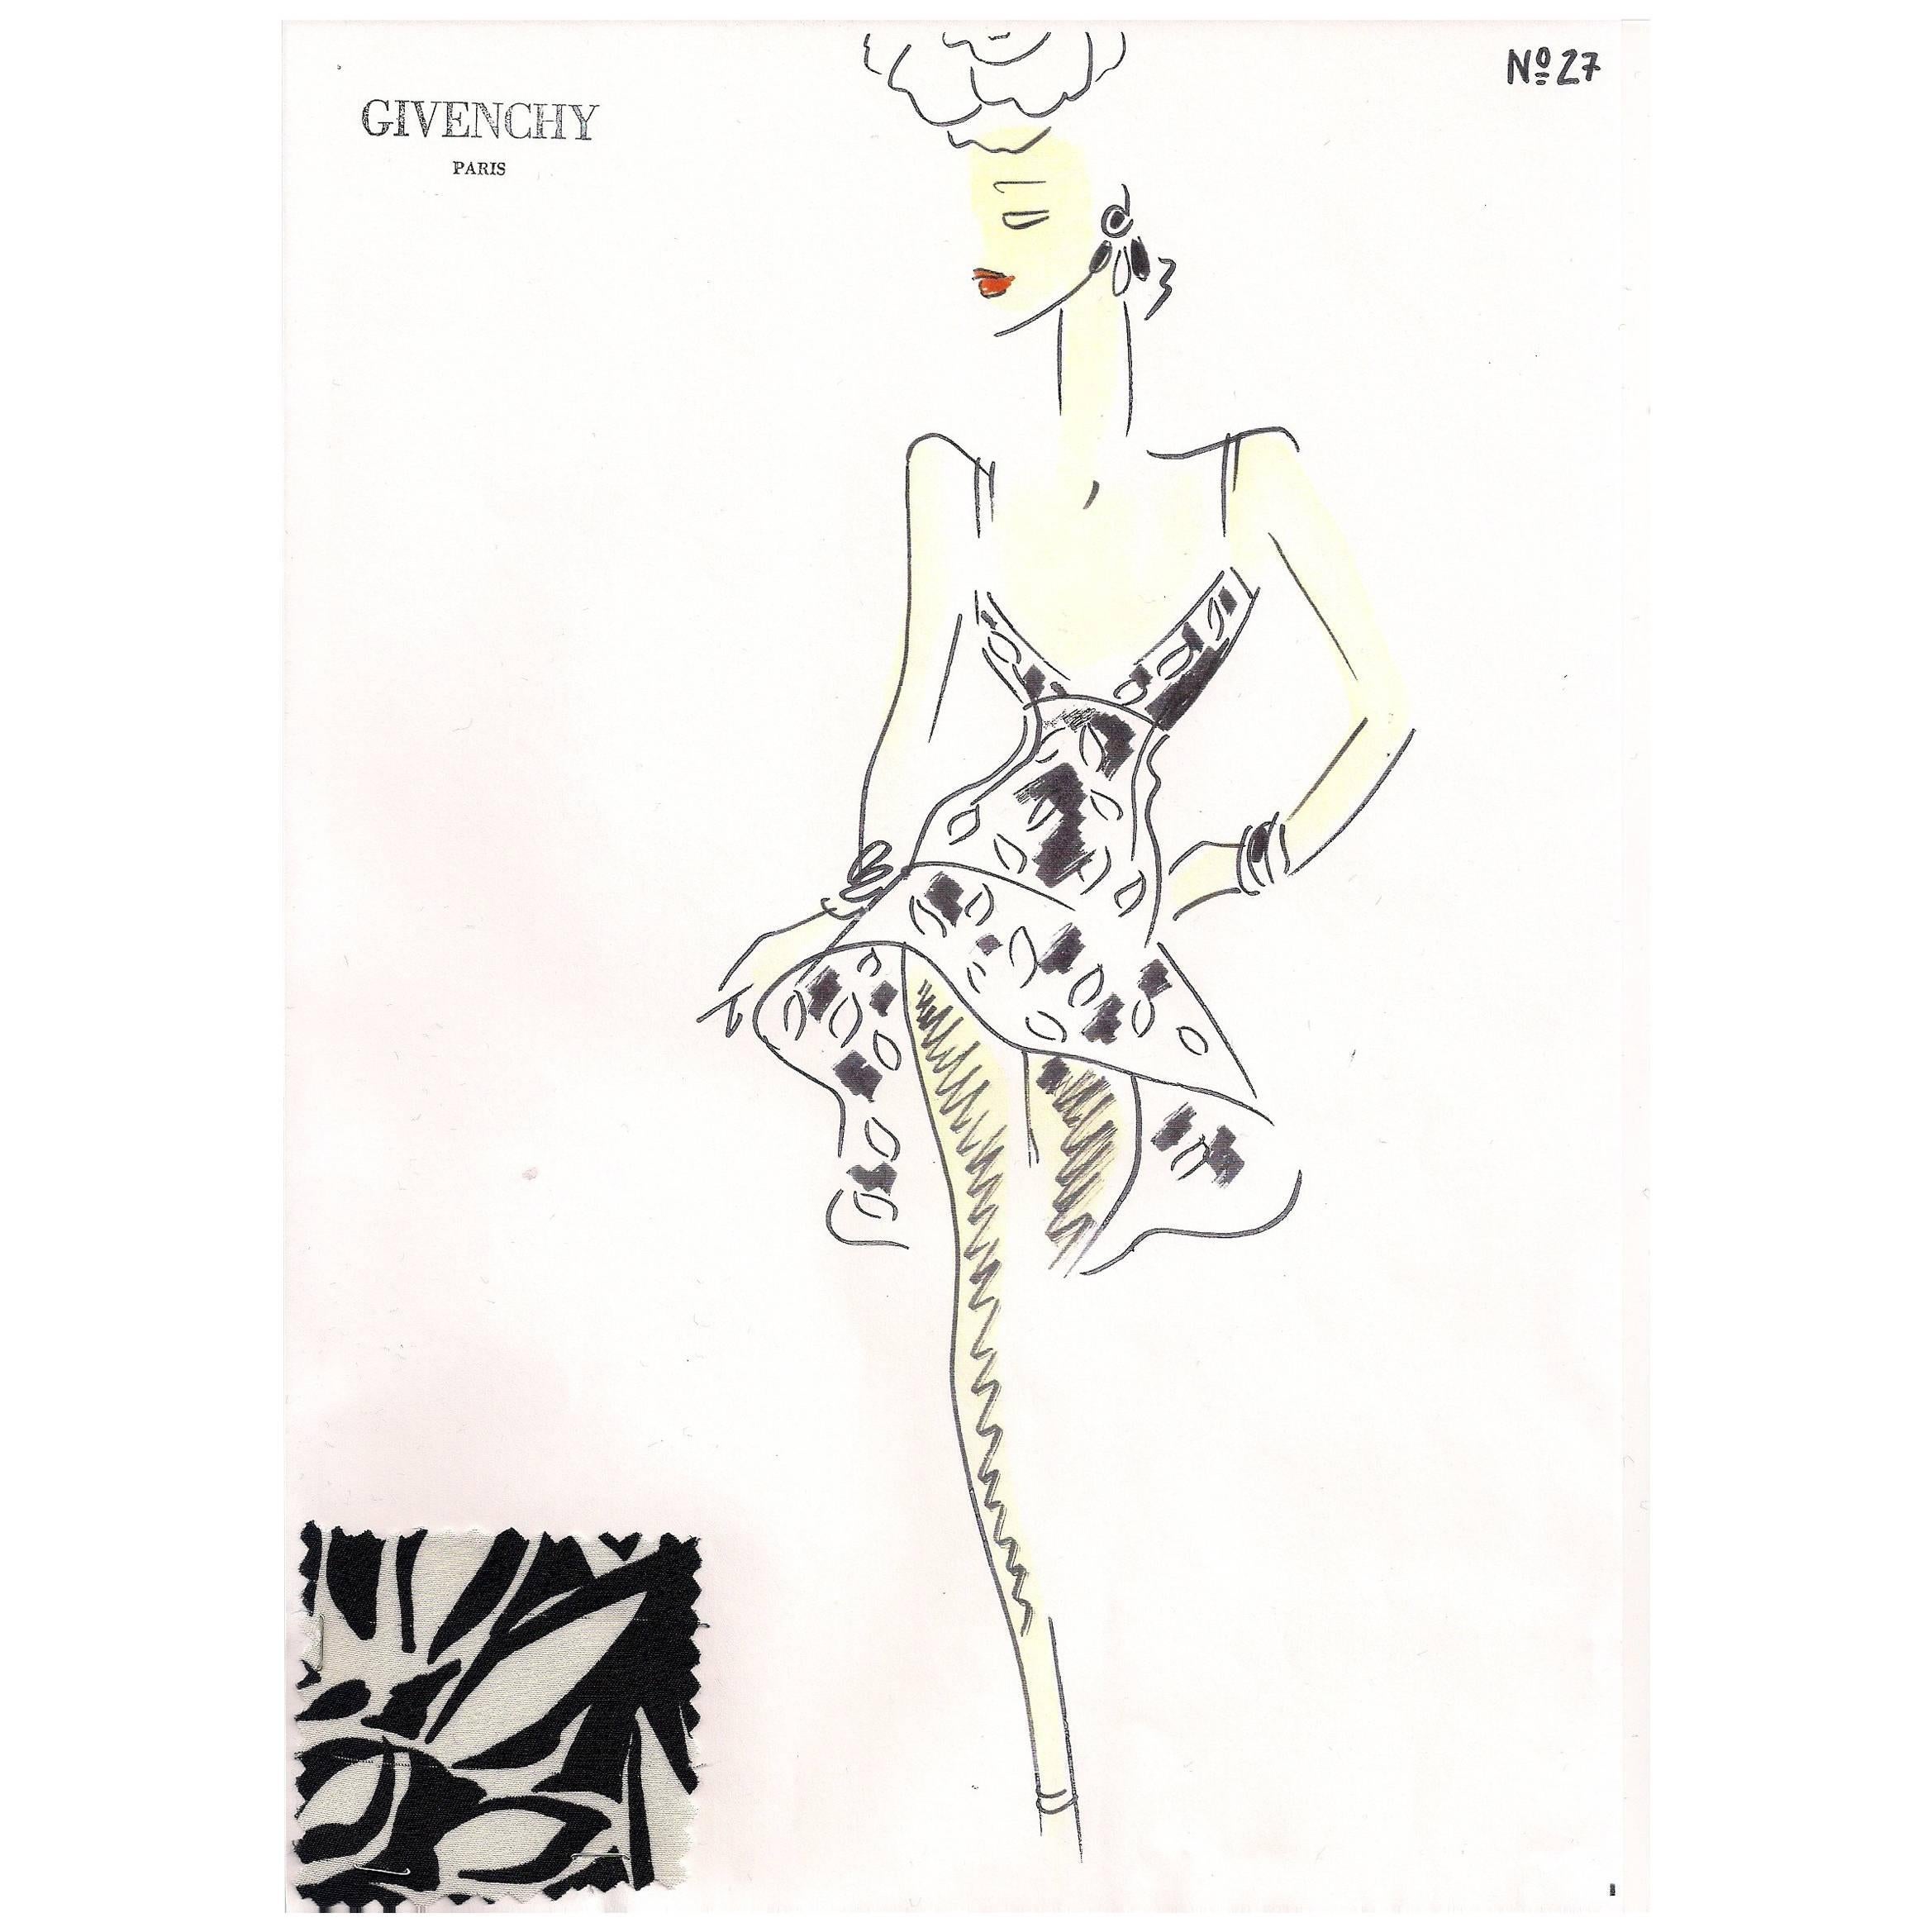 Givenchy Croquis of a Black and White Cocktail Dress with Attached Fabric Swatch